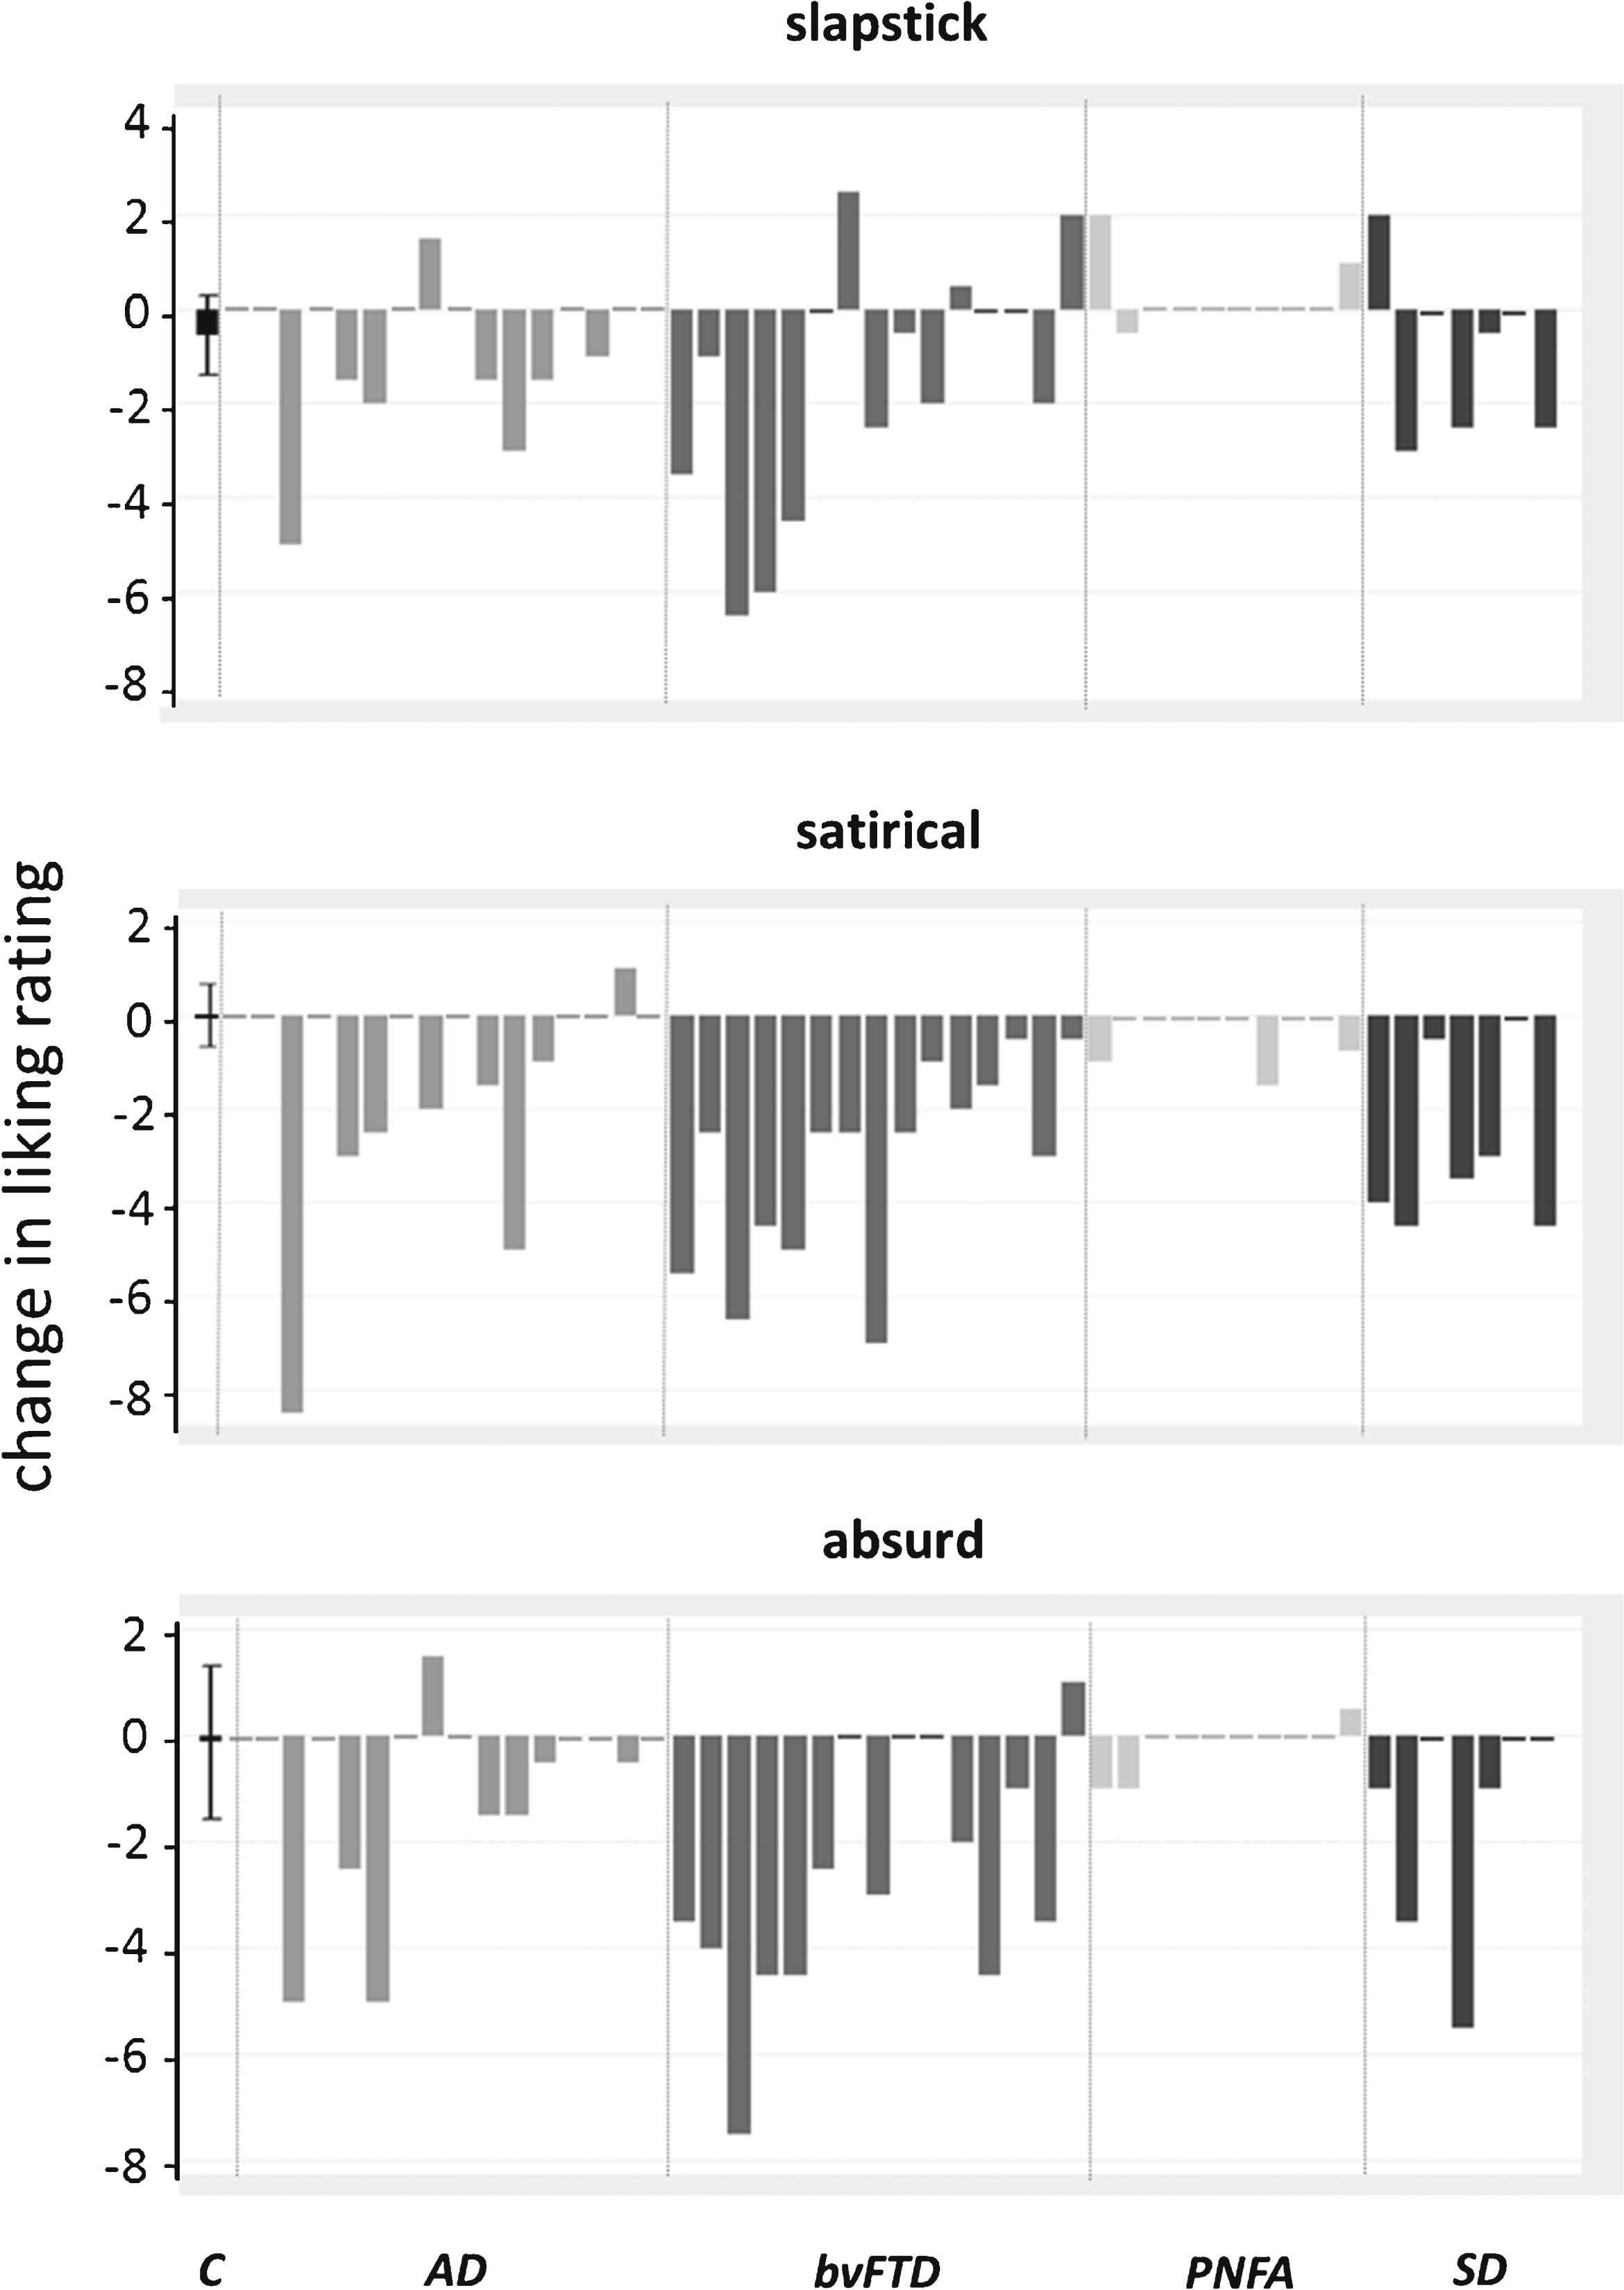 Questionnaire data on changes in liking of comedy over a 15 year interval are shown for individual patients in each disease group (Alzheimer’ disease, AD; behavioral variant frontotemporal dementia, bvFTD; progressive nonfluent aphasia, PNFA; semantic dementia, SD) alongside the mean change in liking for the healthy control group (C), with error bars indicating standard deviation from the mean in controls. Data for each comedy genre are plotted in separate panels. In each plot, the zero line indicates no change over the interval; values below the line indicate reduced liking and values above the line increased liking for that comedy genre, on a 10-point Likert scale (see text and Table 2 for details).